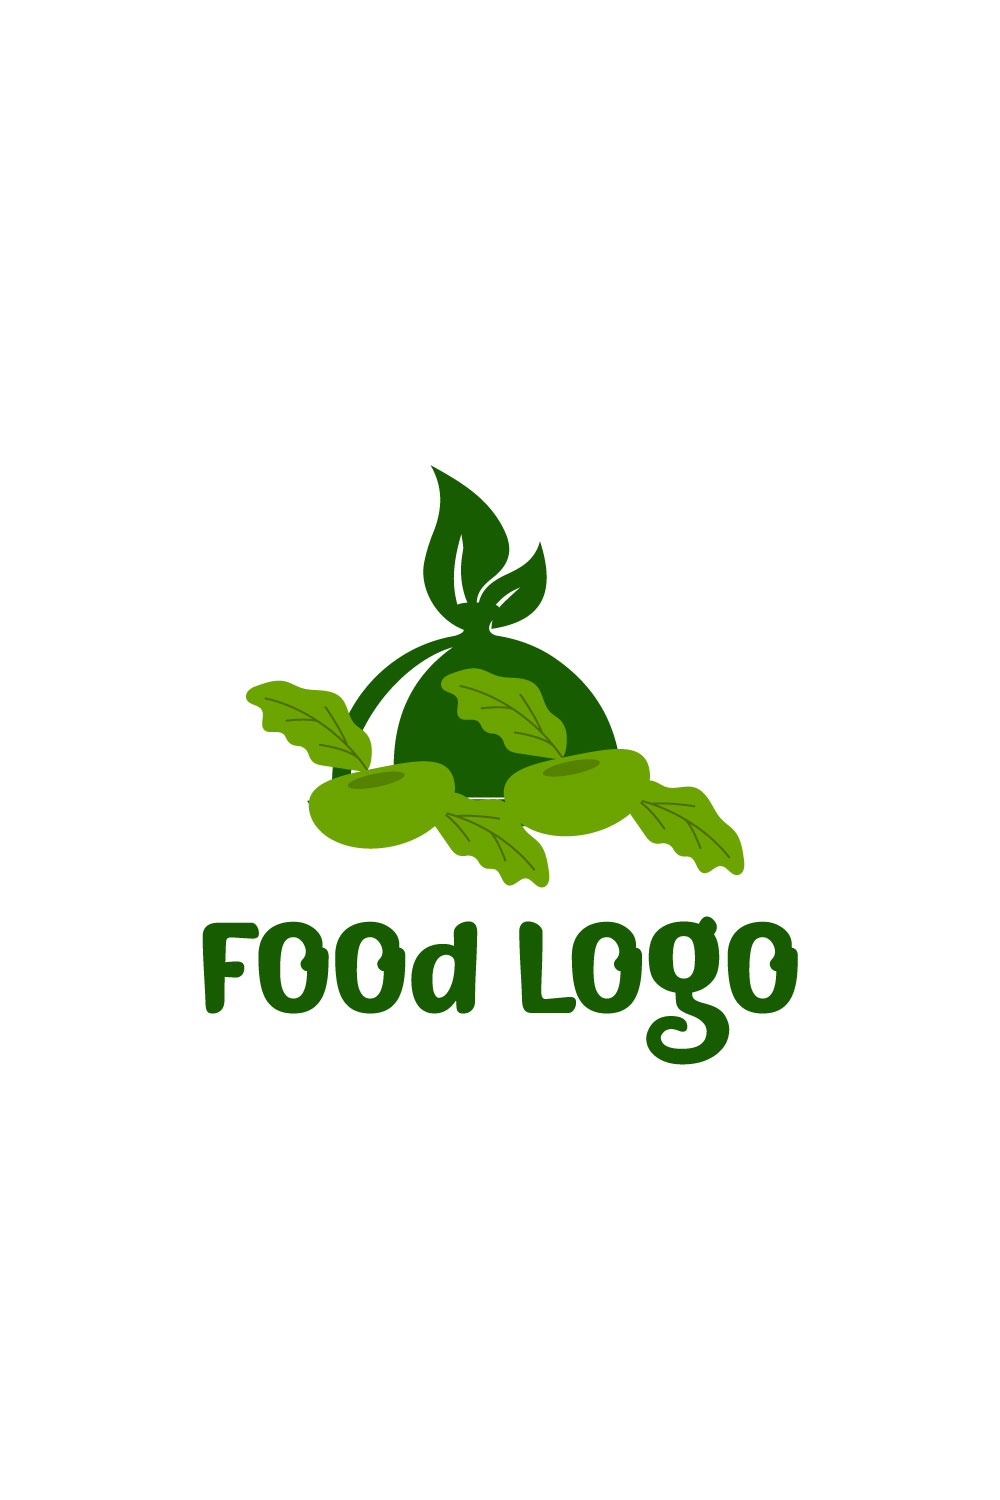 Free cooking logo pinterest preview image.